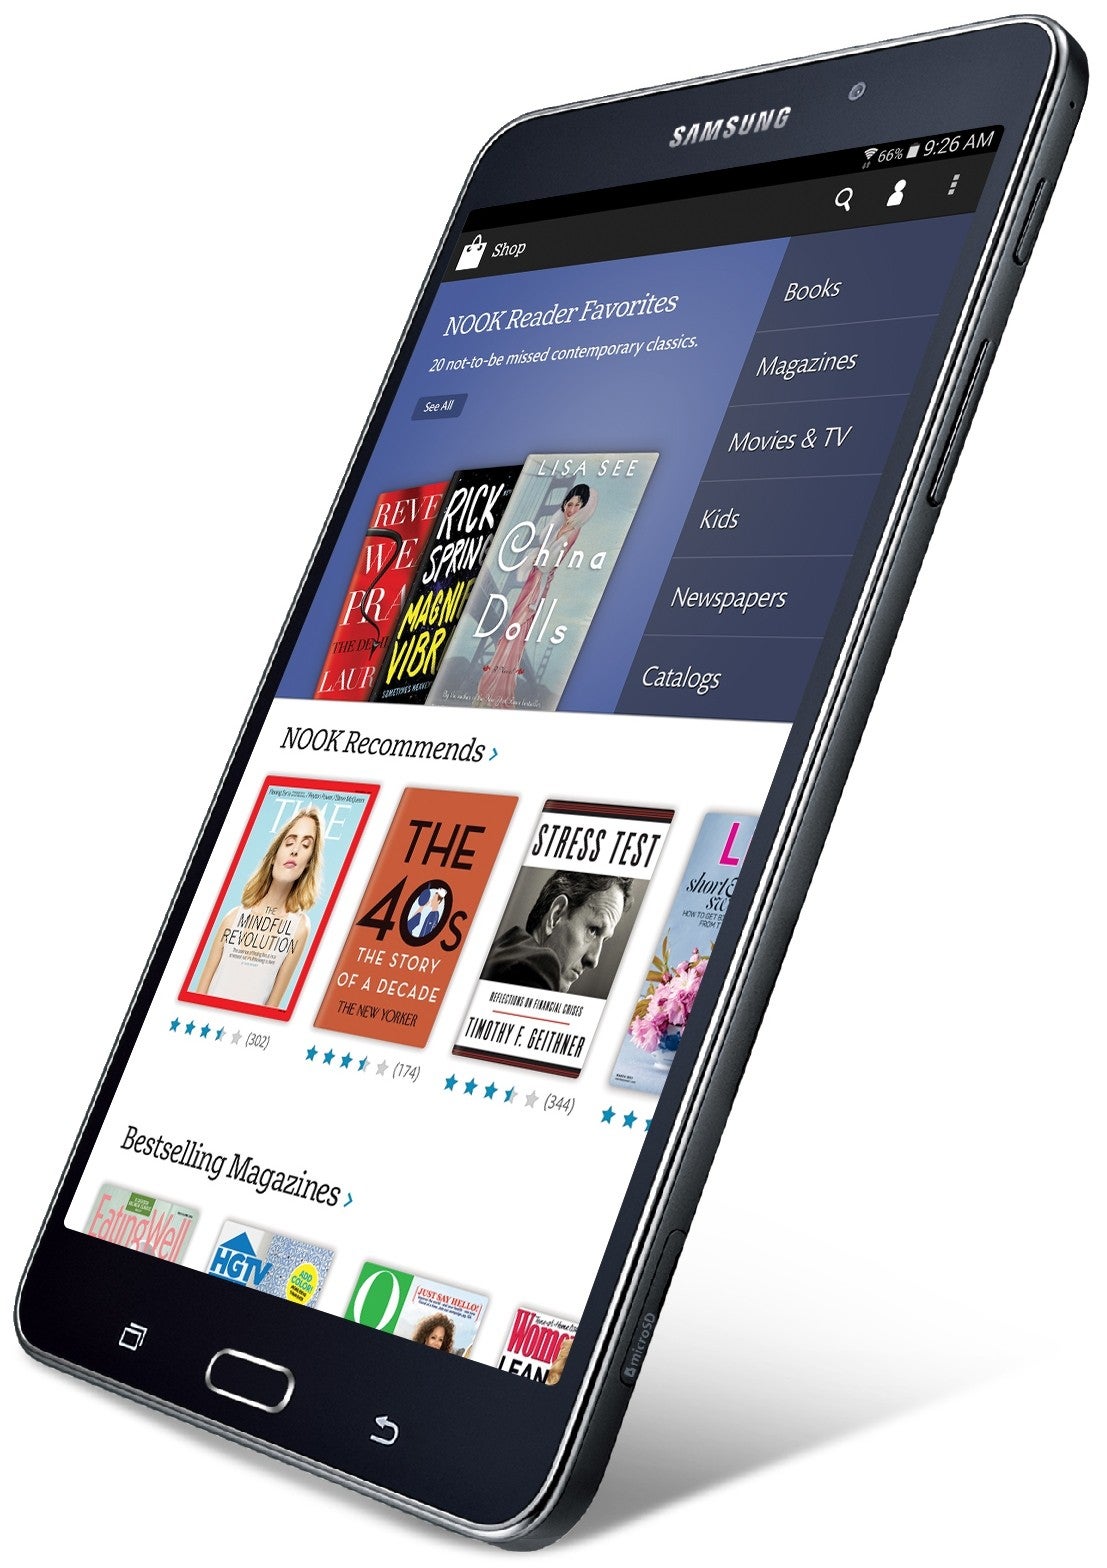 Samsung announces Galaxy Tab 4 Nook tablets, the first one should be launched in August